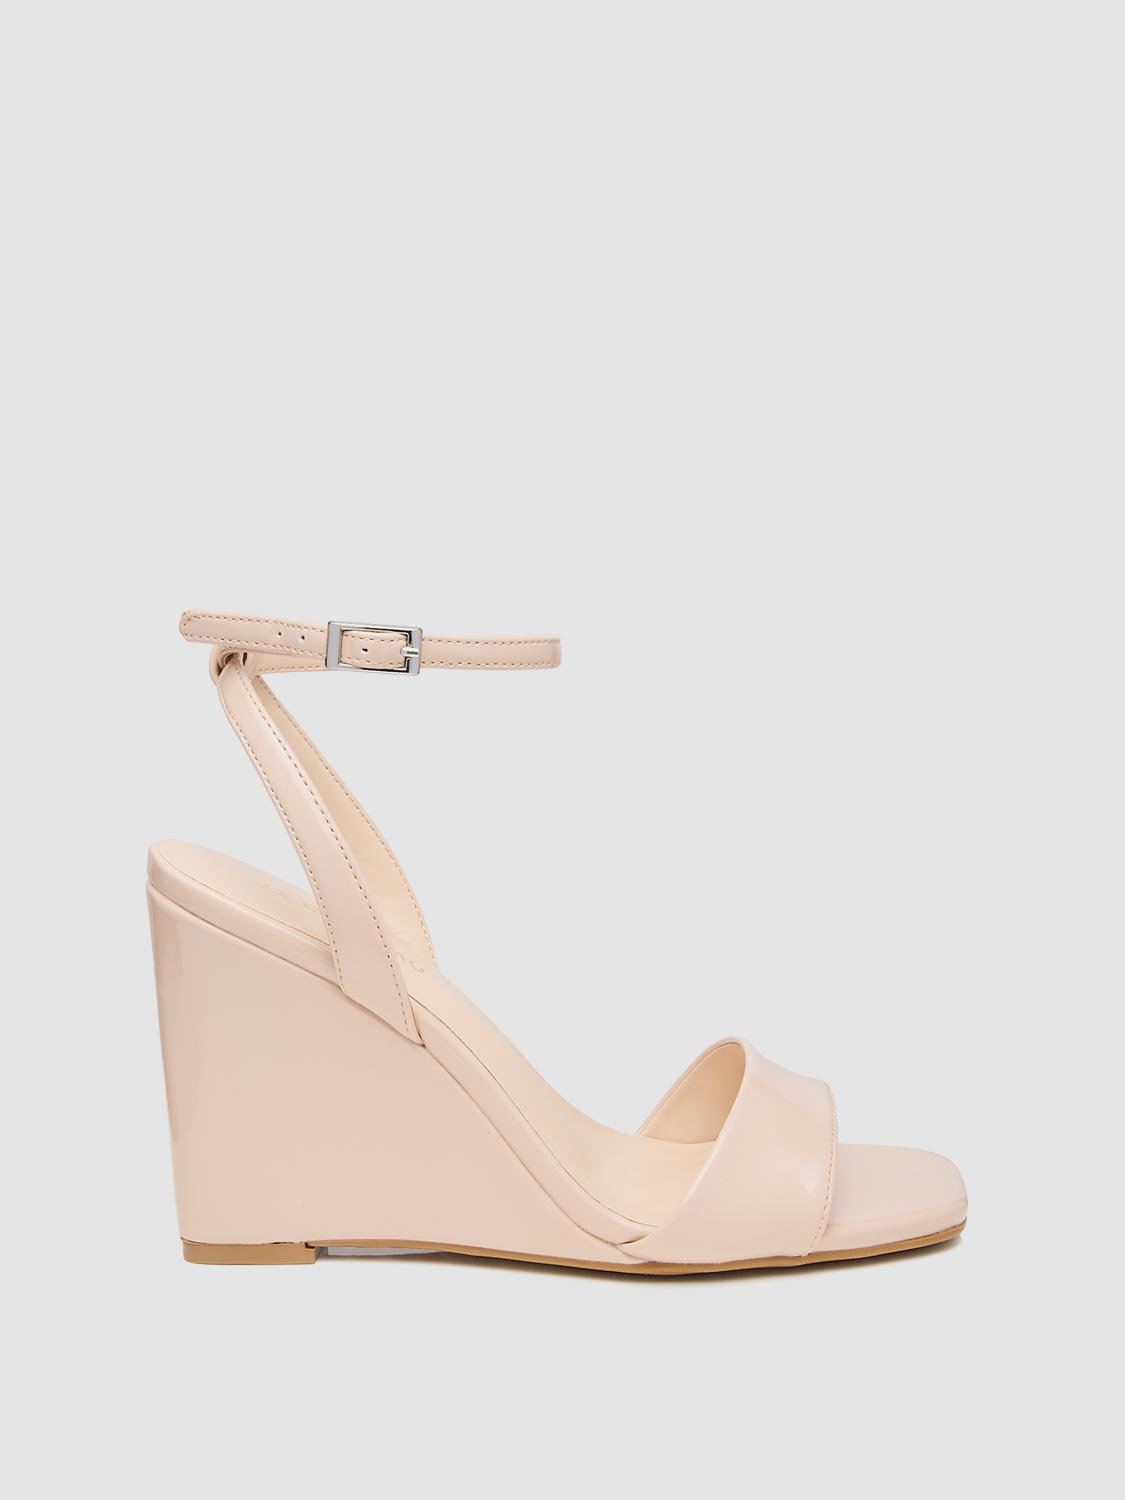 Square Toe Patent Leather High Heel Wedge Sandal